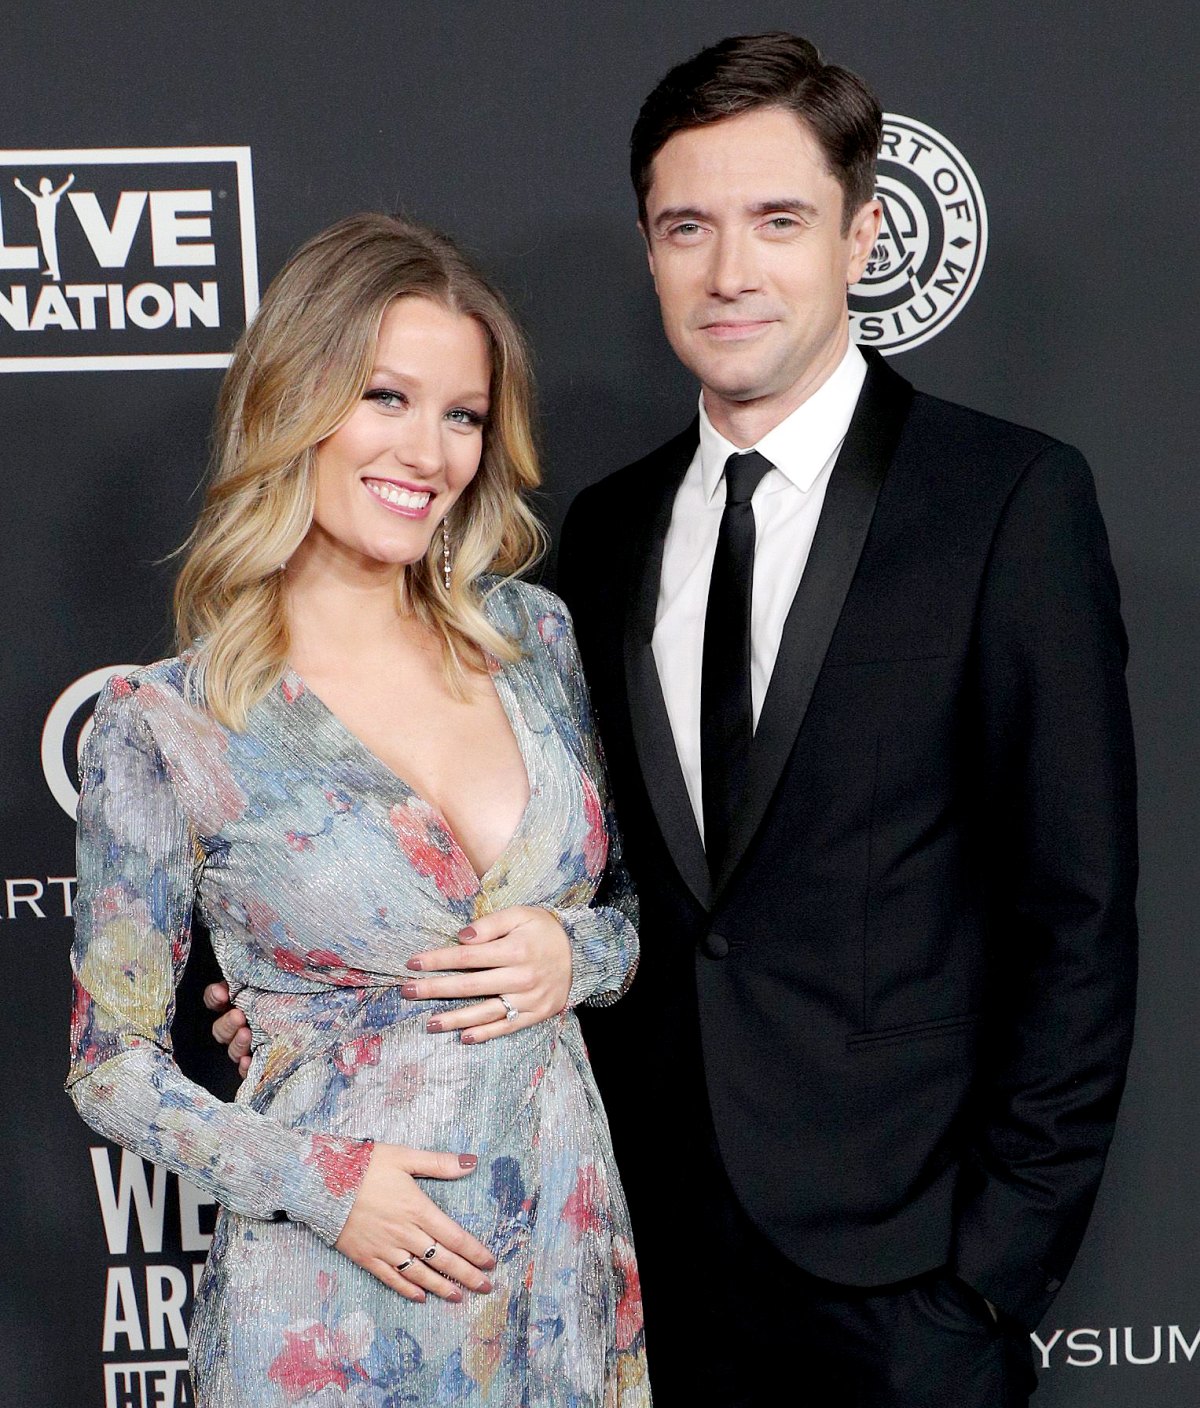 2020 Celebrity Pregnancy Announcements Which Stars Are Expecting